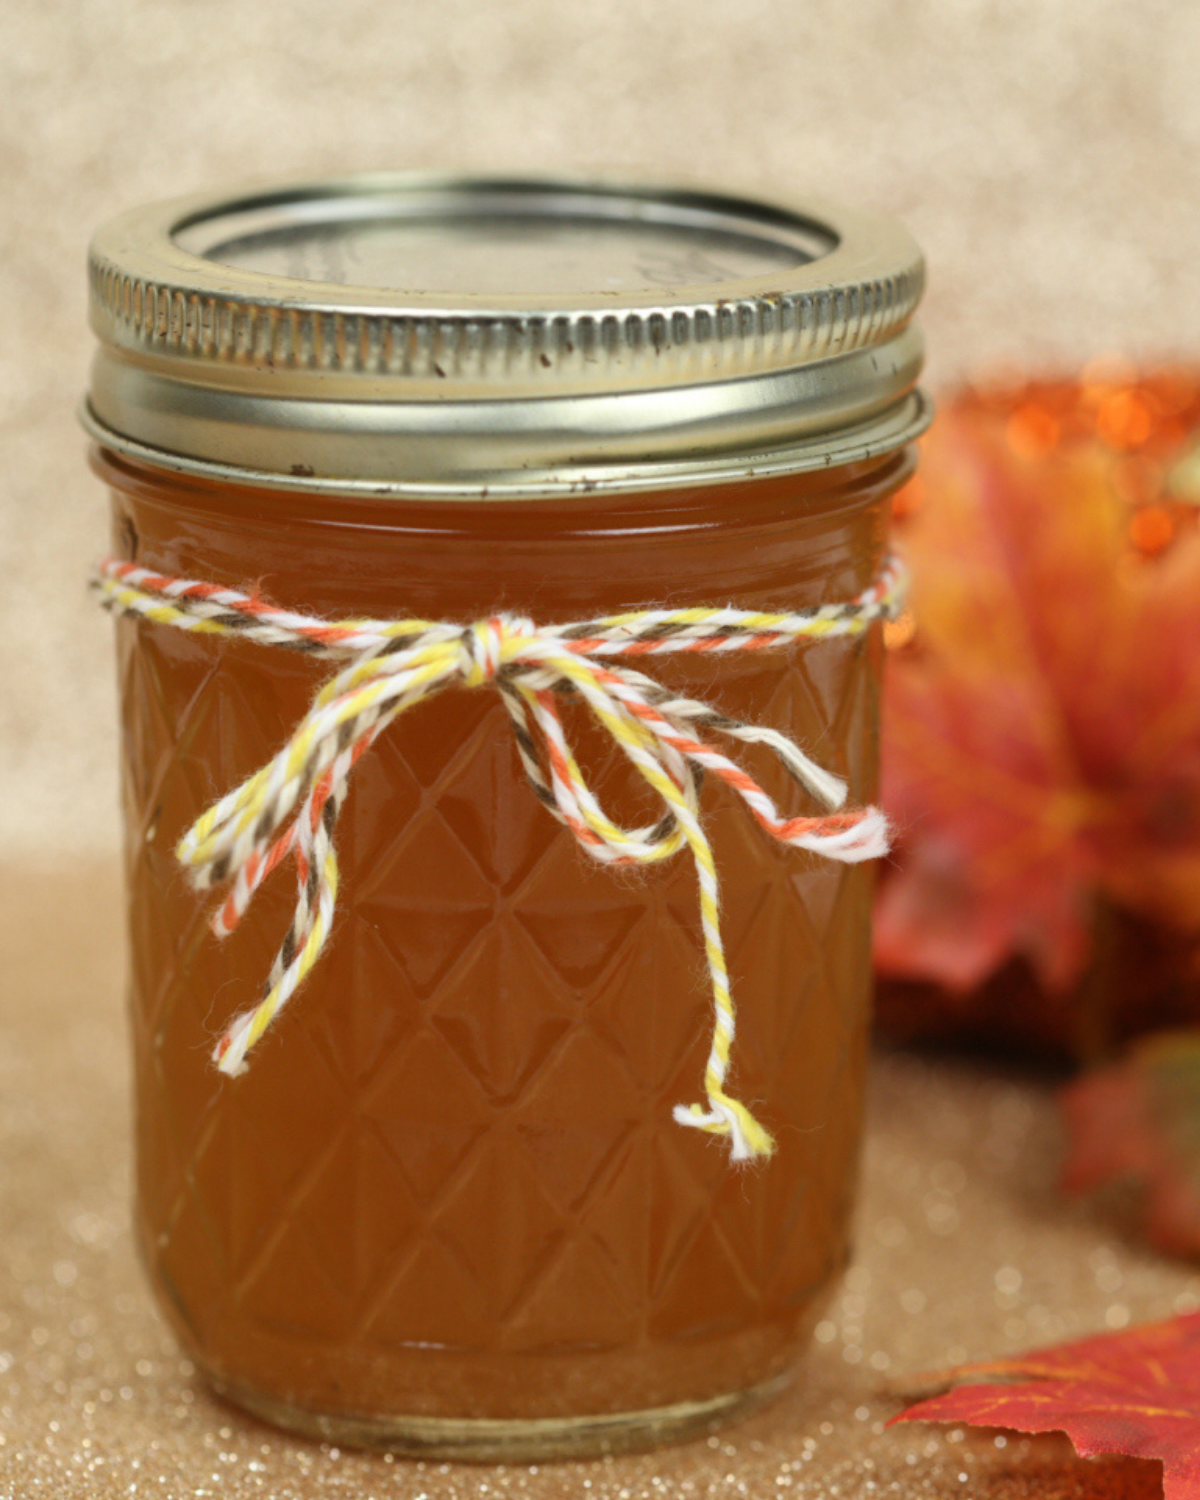 Pumpkin flavor moonshine in a jar with string around the lid.